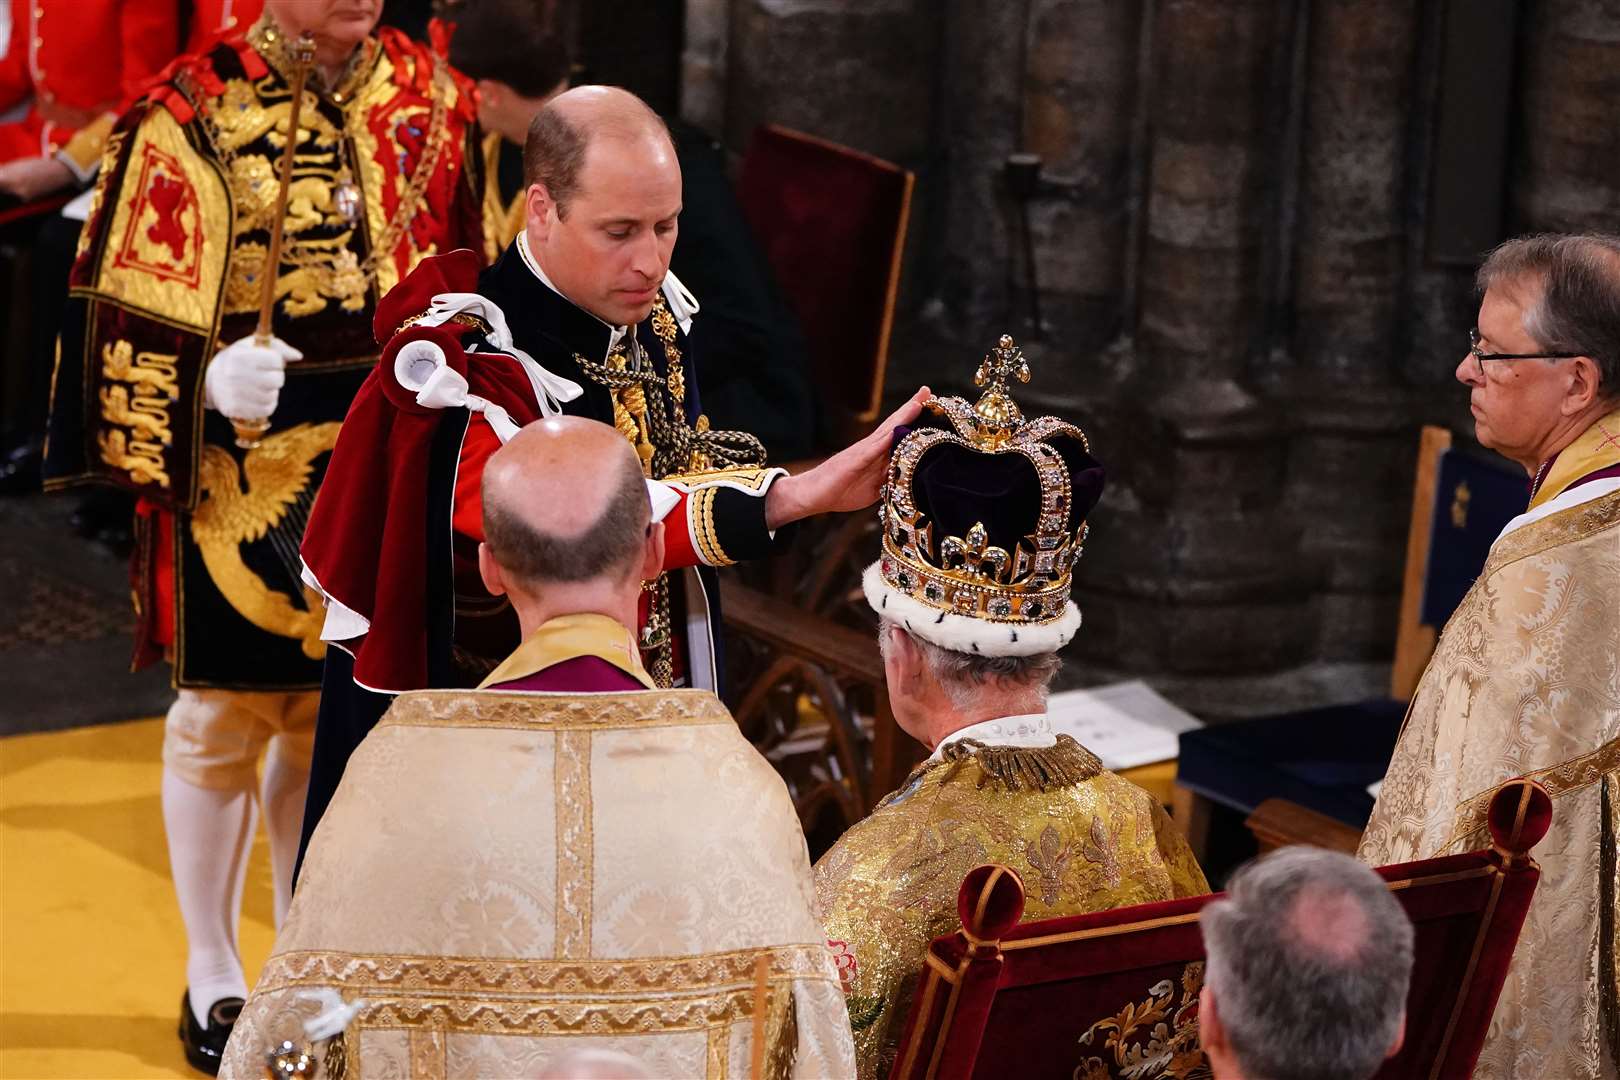 The Prince of Wales touches St Edward’s Crown on Charles’s head during the coronation (Yui Mok/PA)